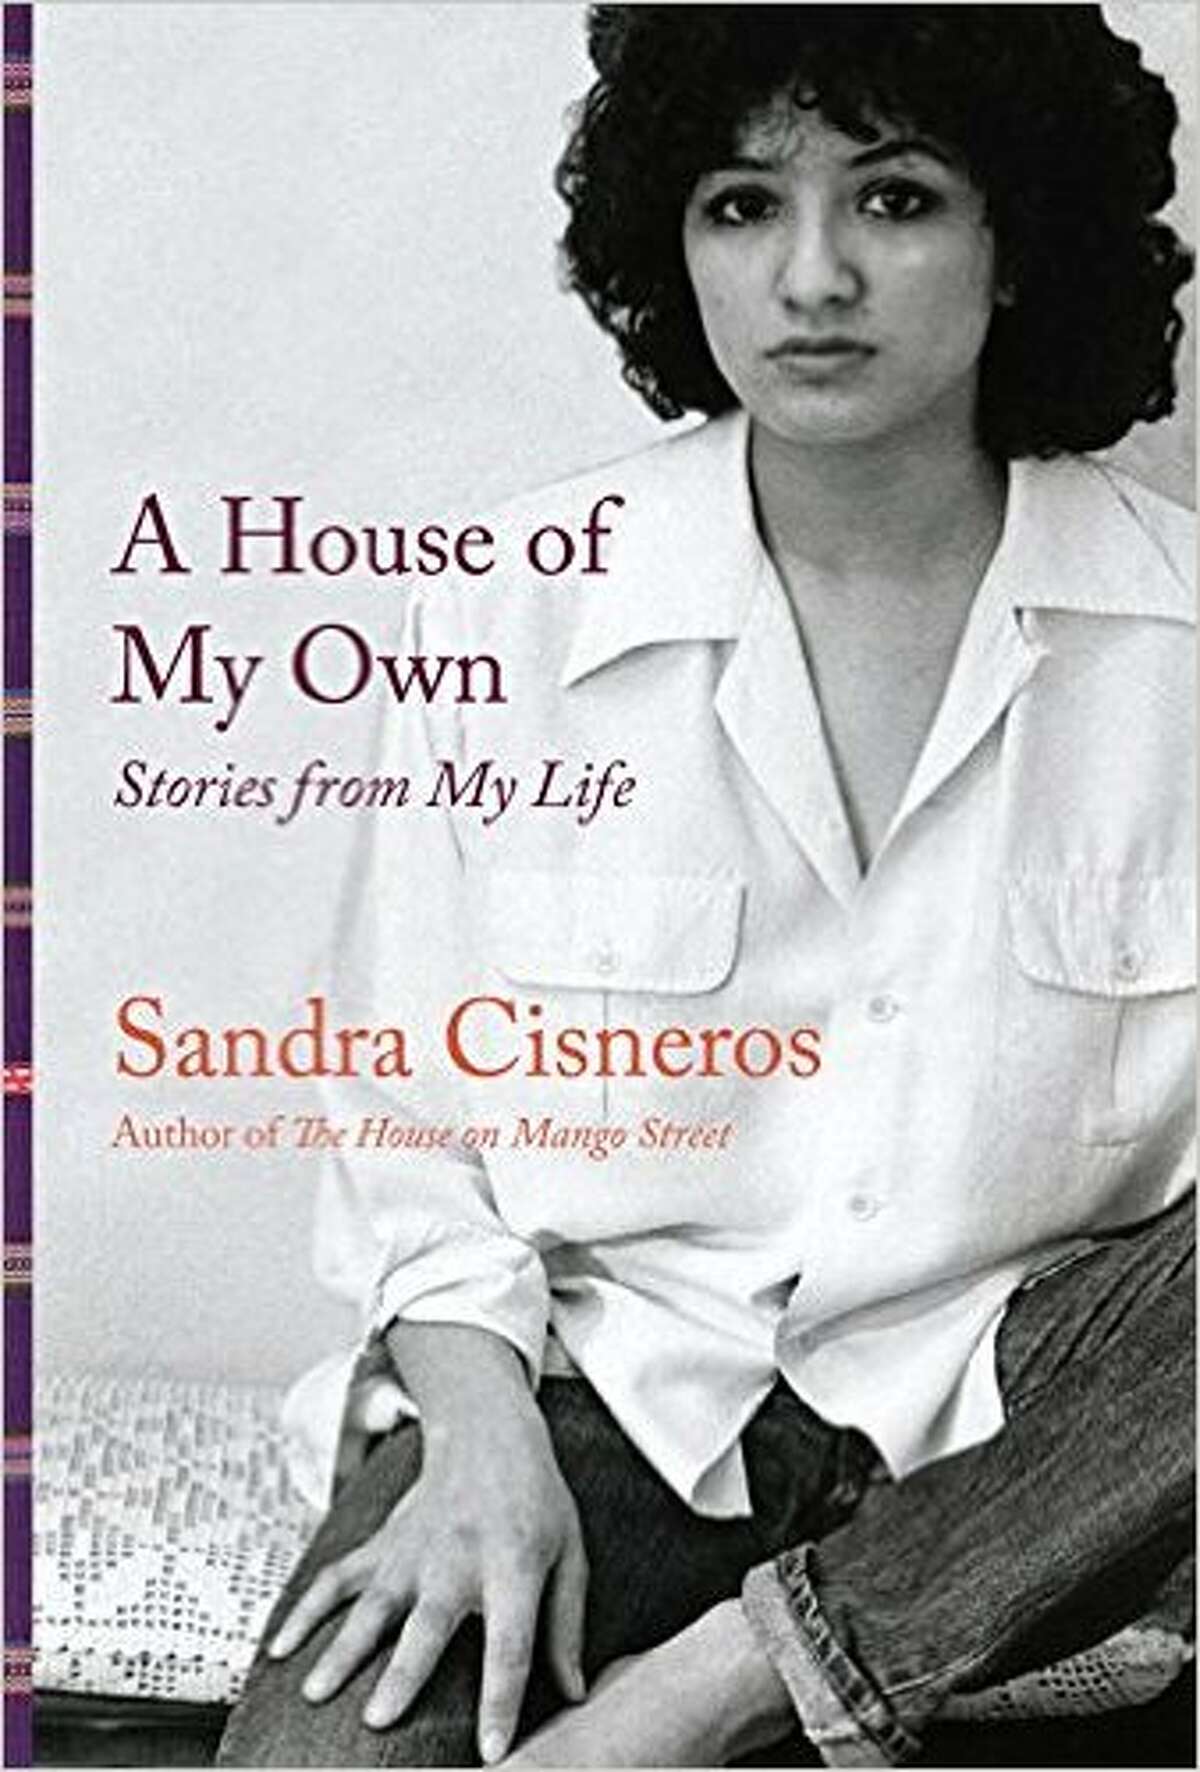 "A House of My Own: Stories from My Life" (2015) is a new and unconventional memoir from Sandra Cisneros. This is a collection of disparate parts — older pieces of writing, lectures, newspaper articles, keynote speeches, stories often told but only now finding their way onto the page — that assembles itself into a bold, beating-heart whole.